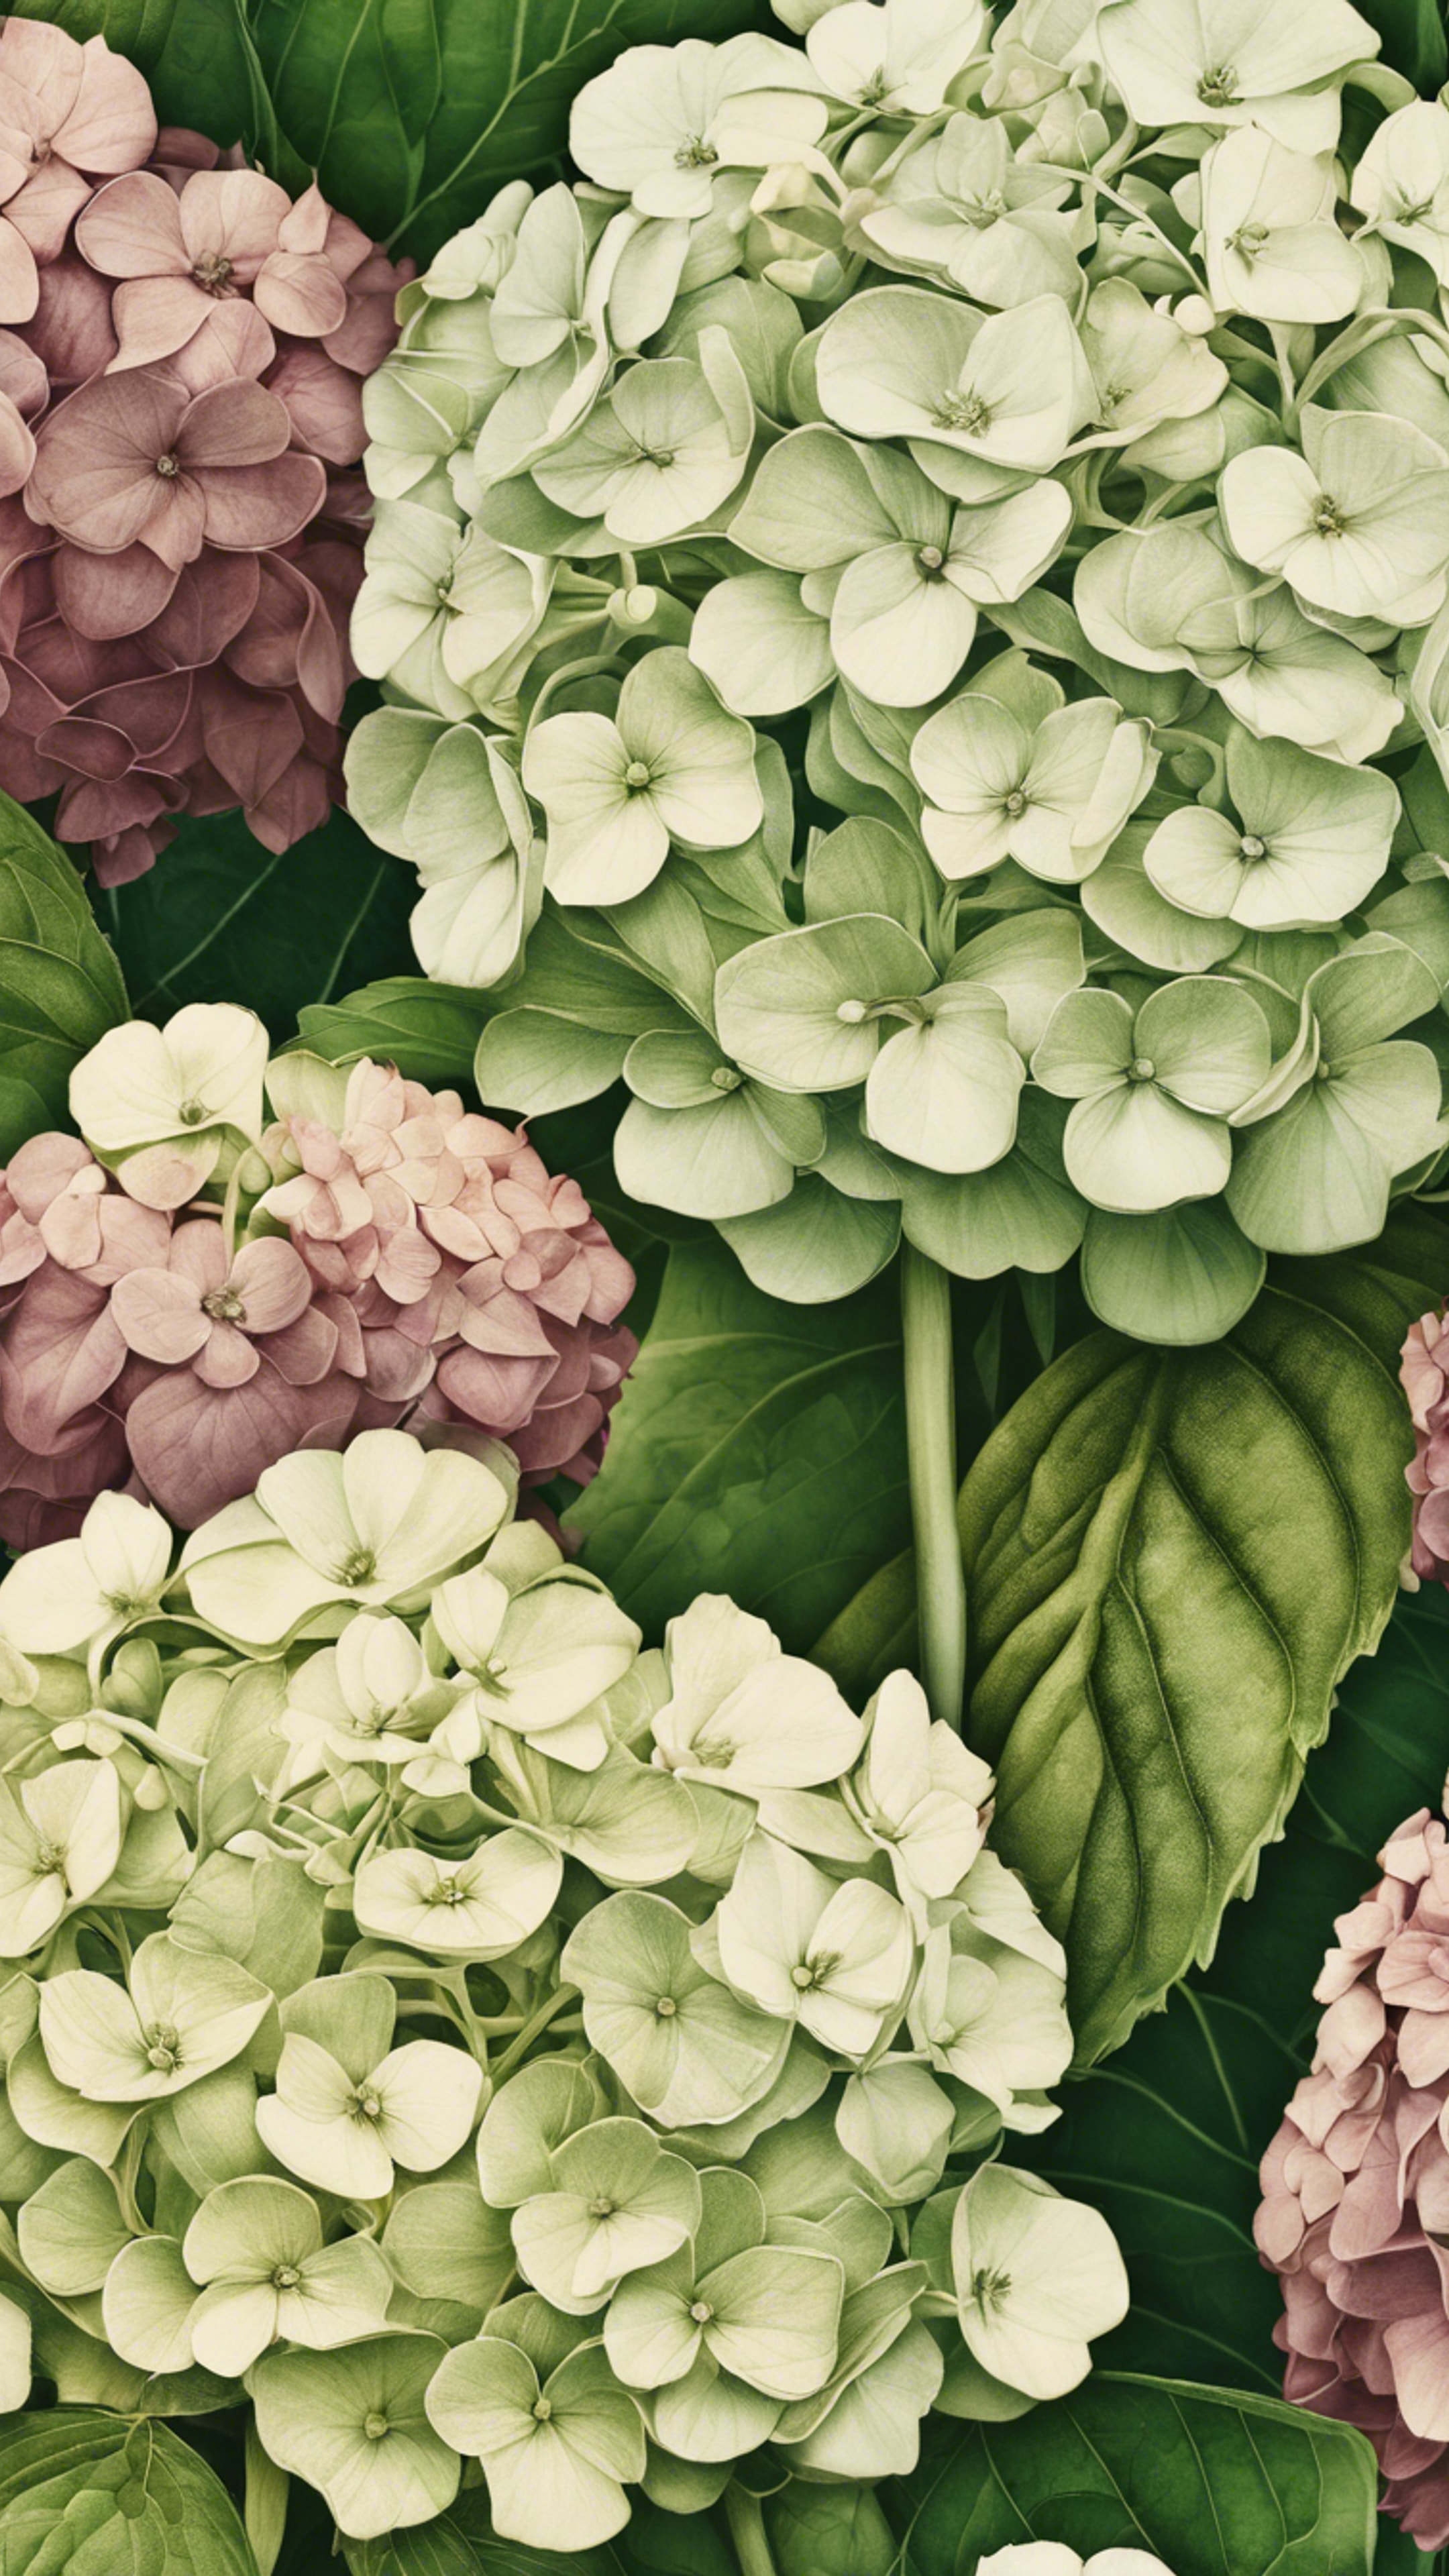 A detailed depiction of a beautifully aged, antique hydrangea illustration from an old botany book. Wallpaper[67df05c72c1d42618eb3]